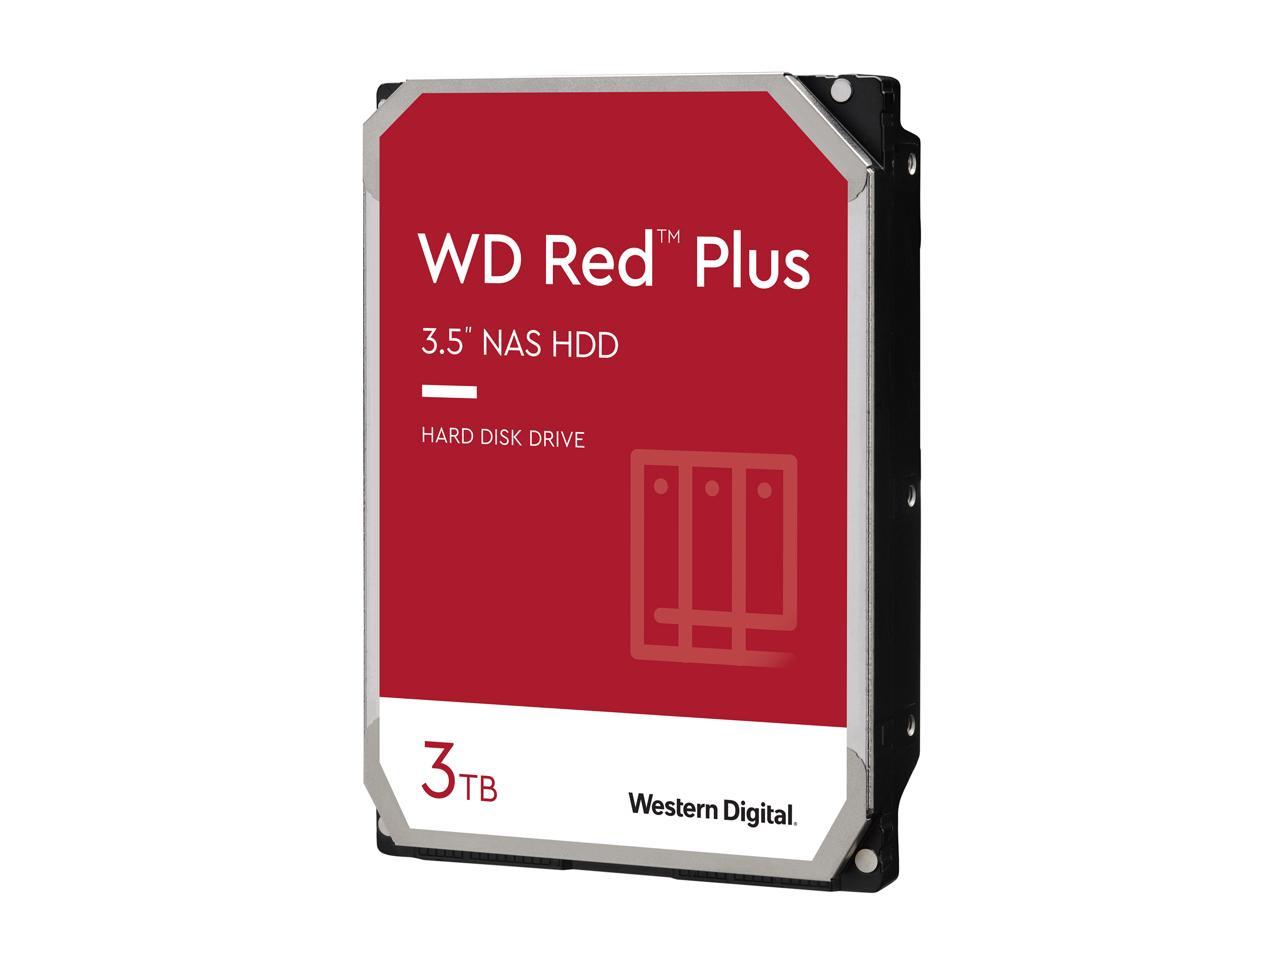 Wd Red Plus 3Tb Nas Hard Disk Drive - 5400 Rpm Class Sata 6Gb/S, Cmr, 64Mb Cache, 3.5 Inch - Wd30Efrx